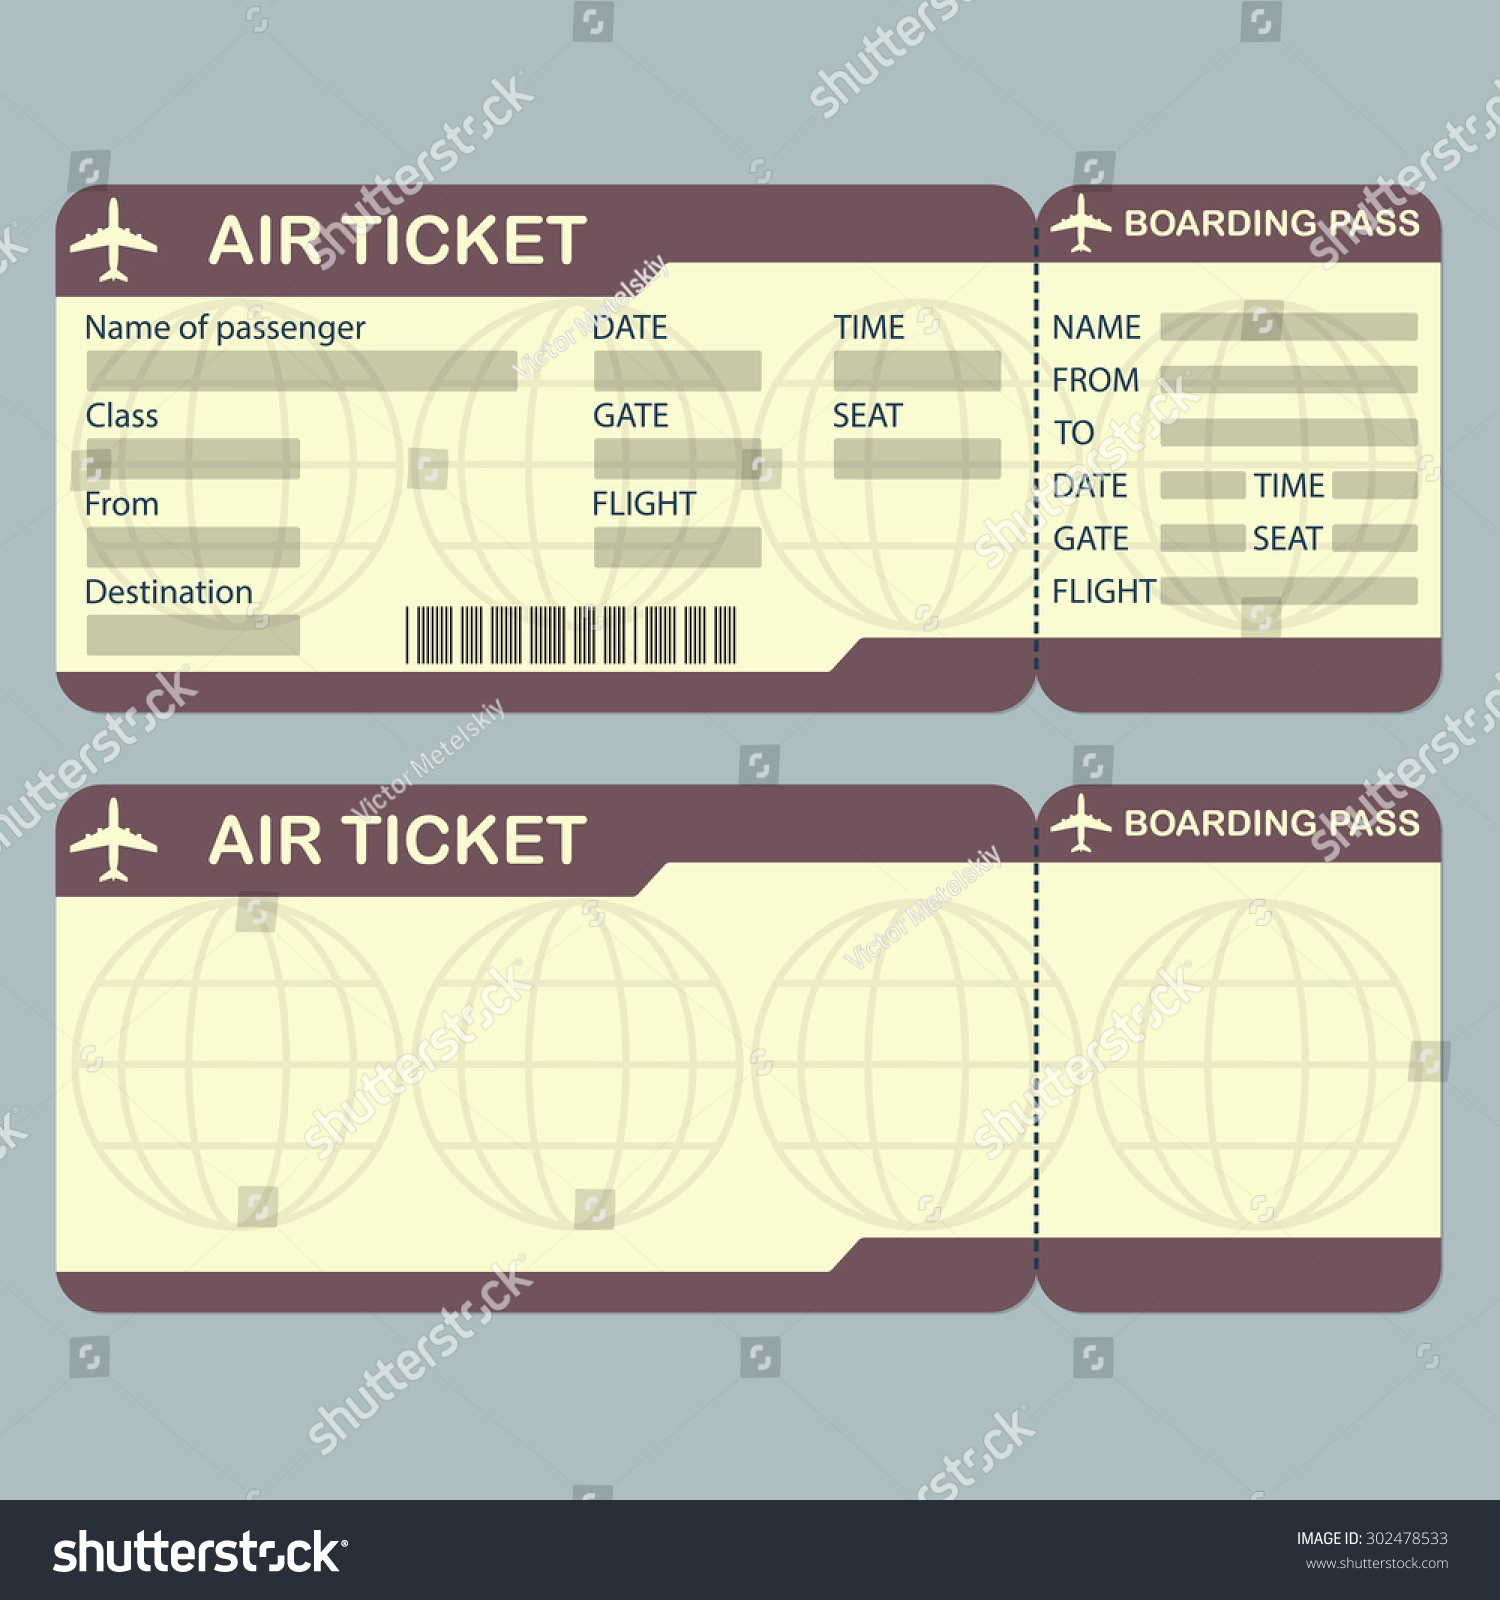 free clipart airplane ticket - photo #50